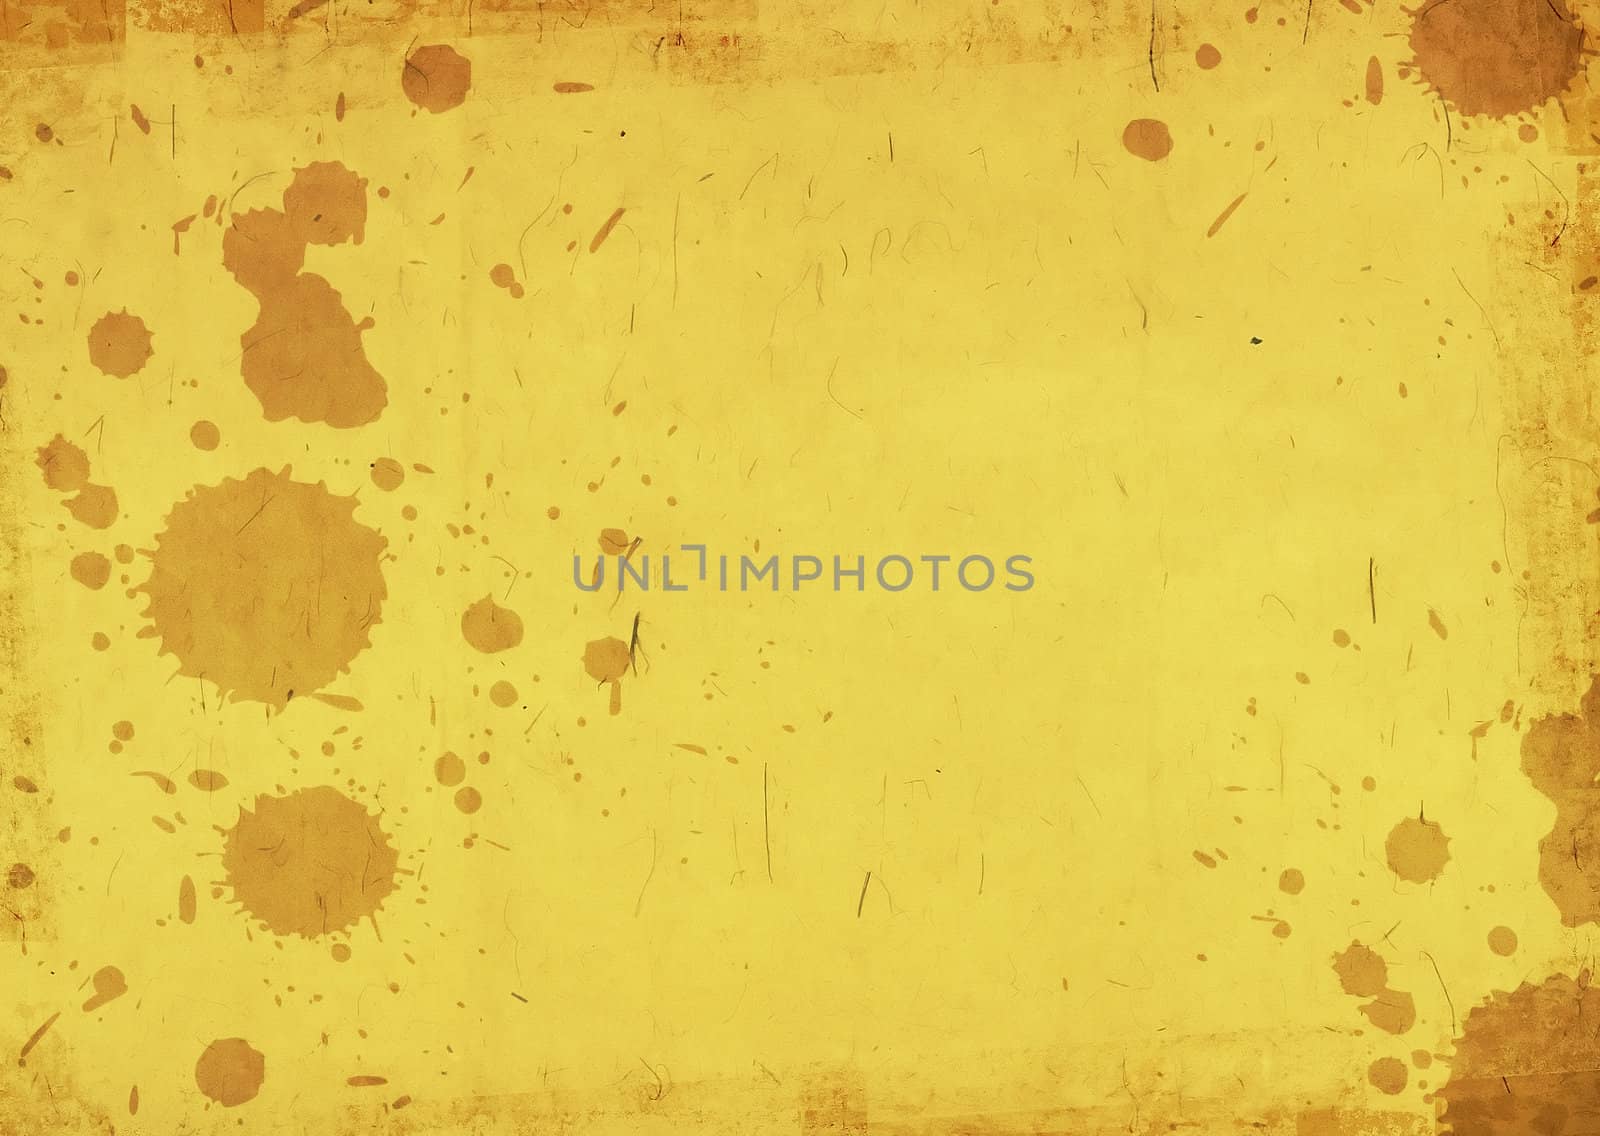 Golden grungy background with some stains